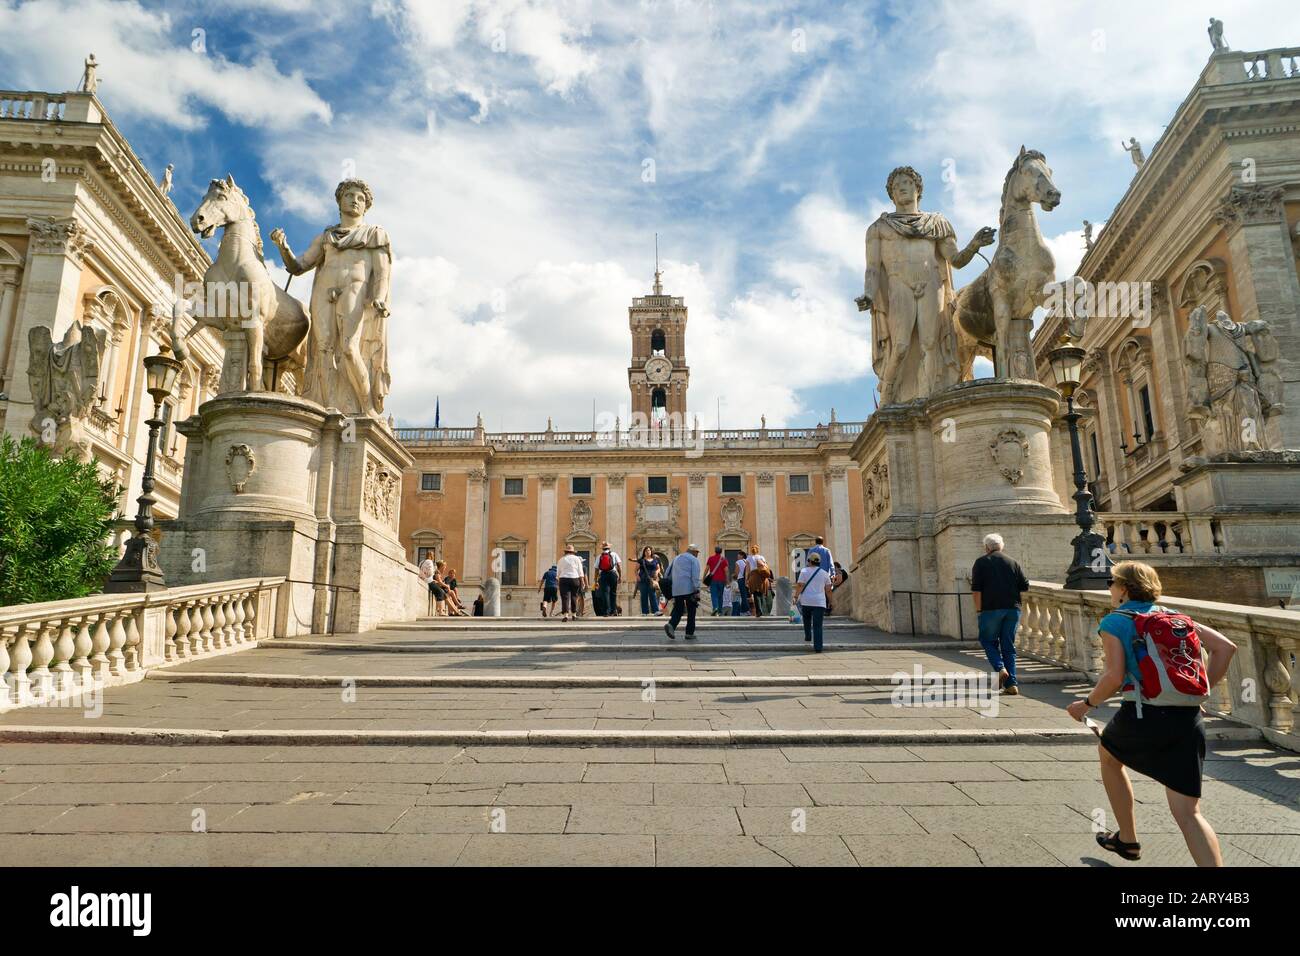 ROME - OCTOBER 3, 2012: Tourists climb the stairs to Capitoline on october 3, 2012 in Rome, Italy. Capitol Hill - one of the hills of ancient Rome, wh Stock Photo